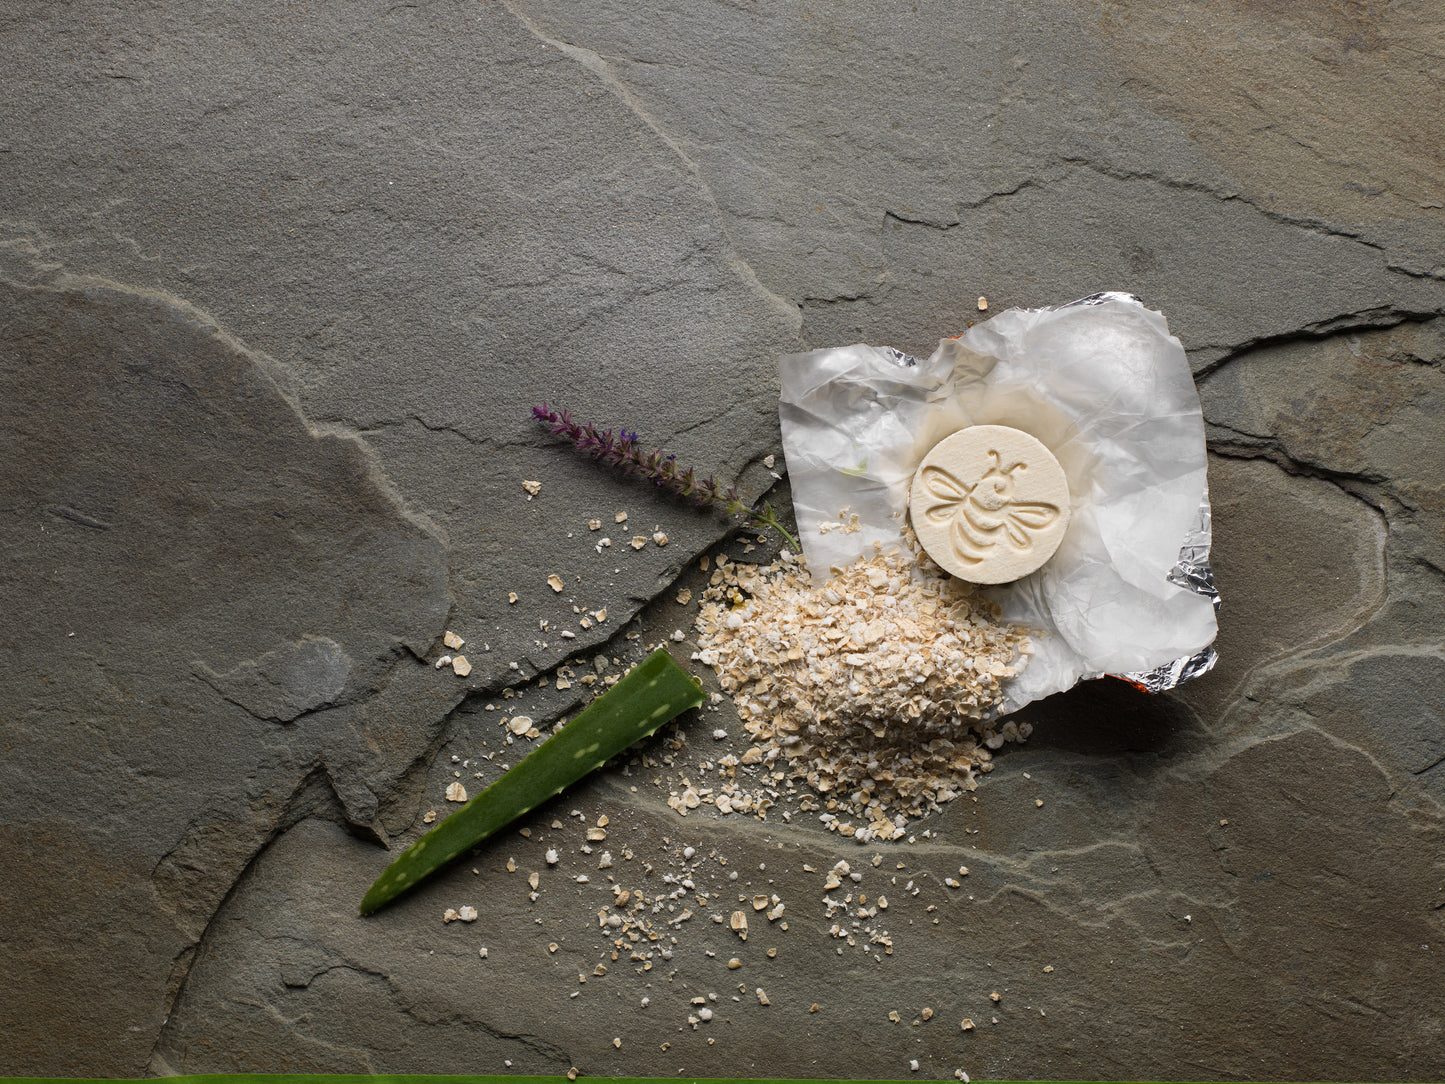 A bath fizzy with a small pile of oats, an aloe leaf, and a sprig of lavender.